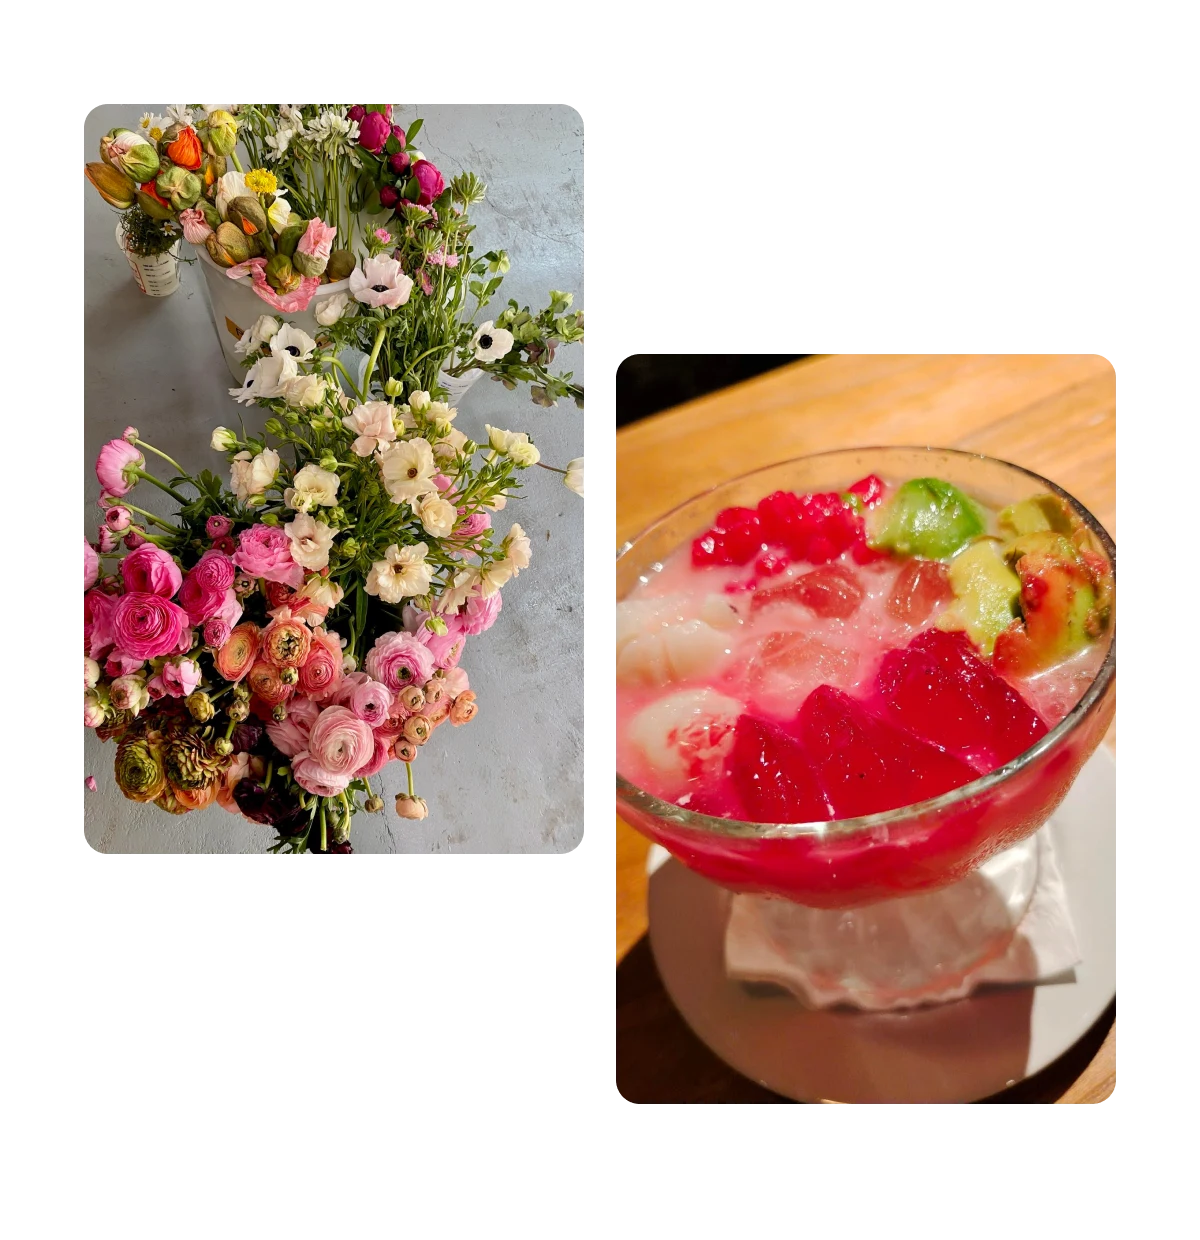 Two pins, floral arrangement, healthy dish of food